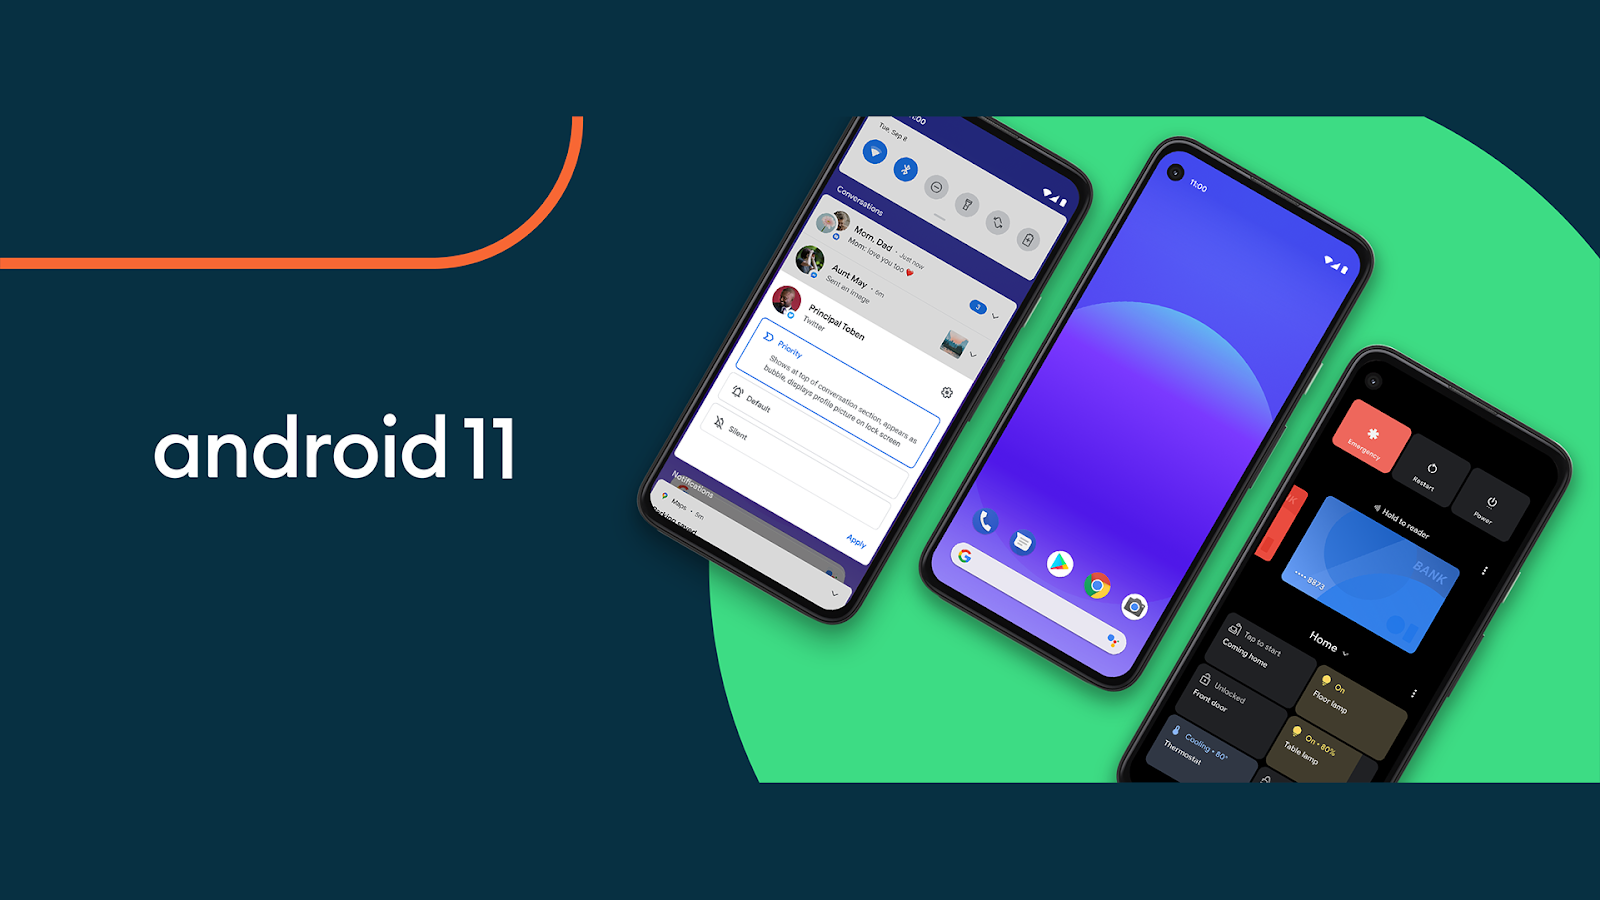 Turning it up to 11: Android 11 for developers